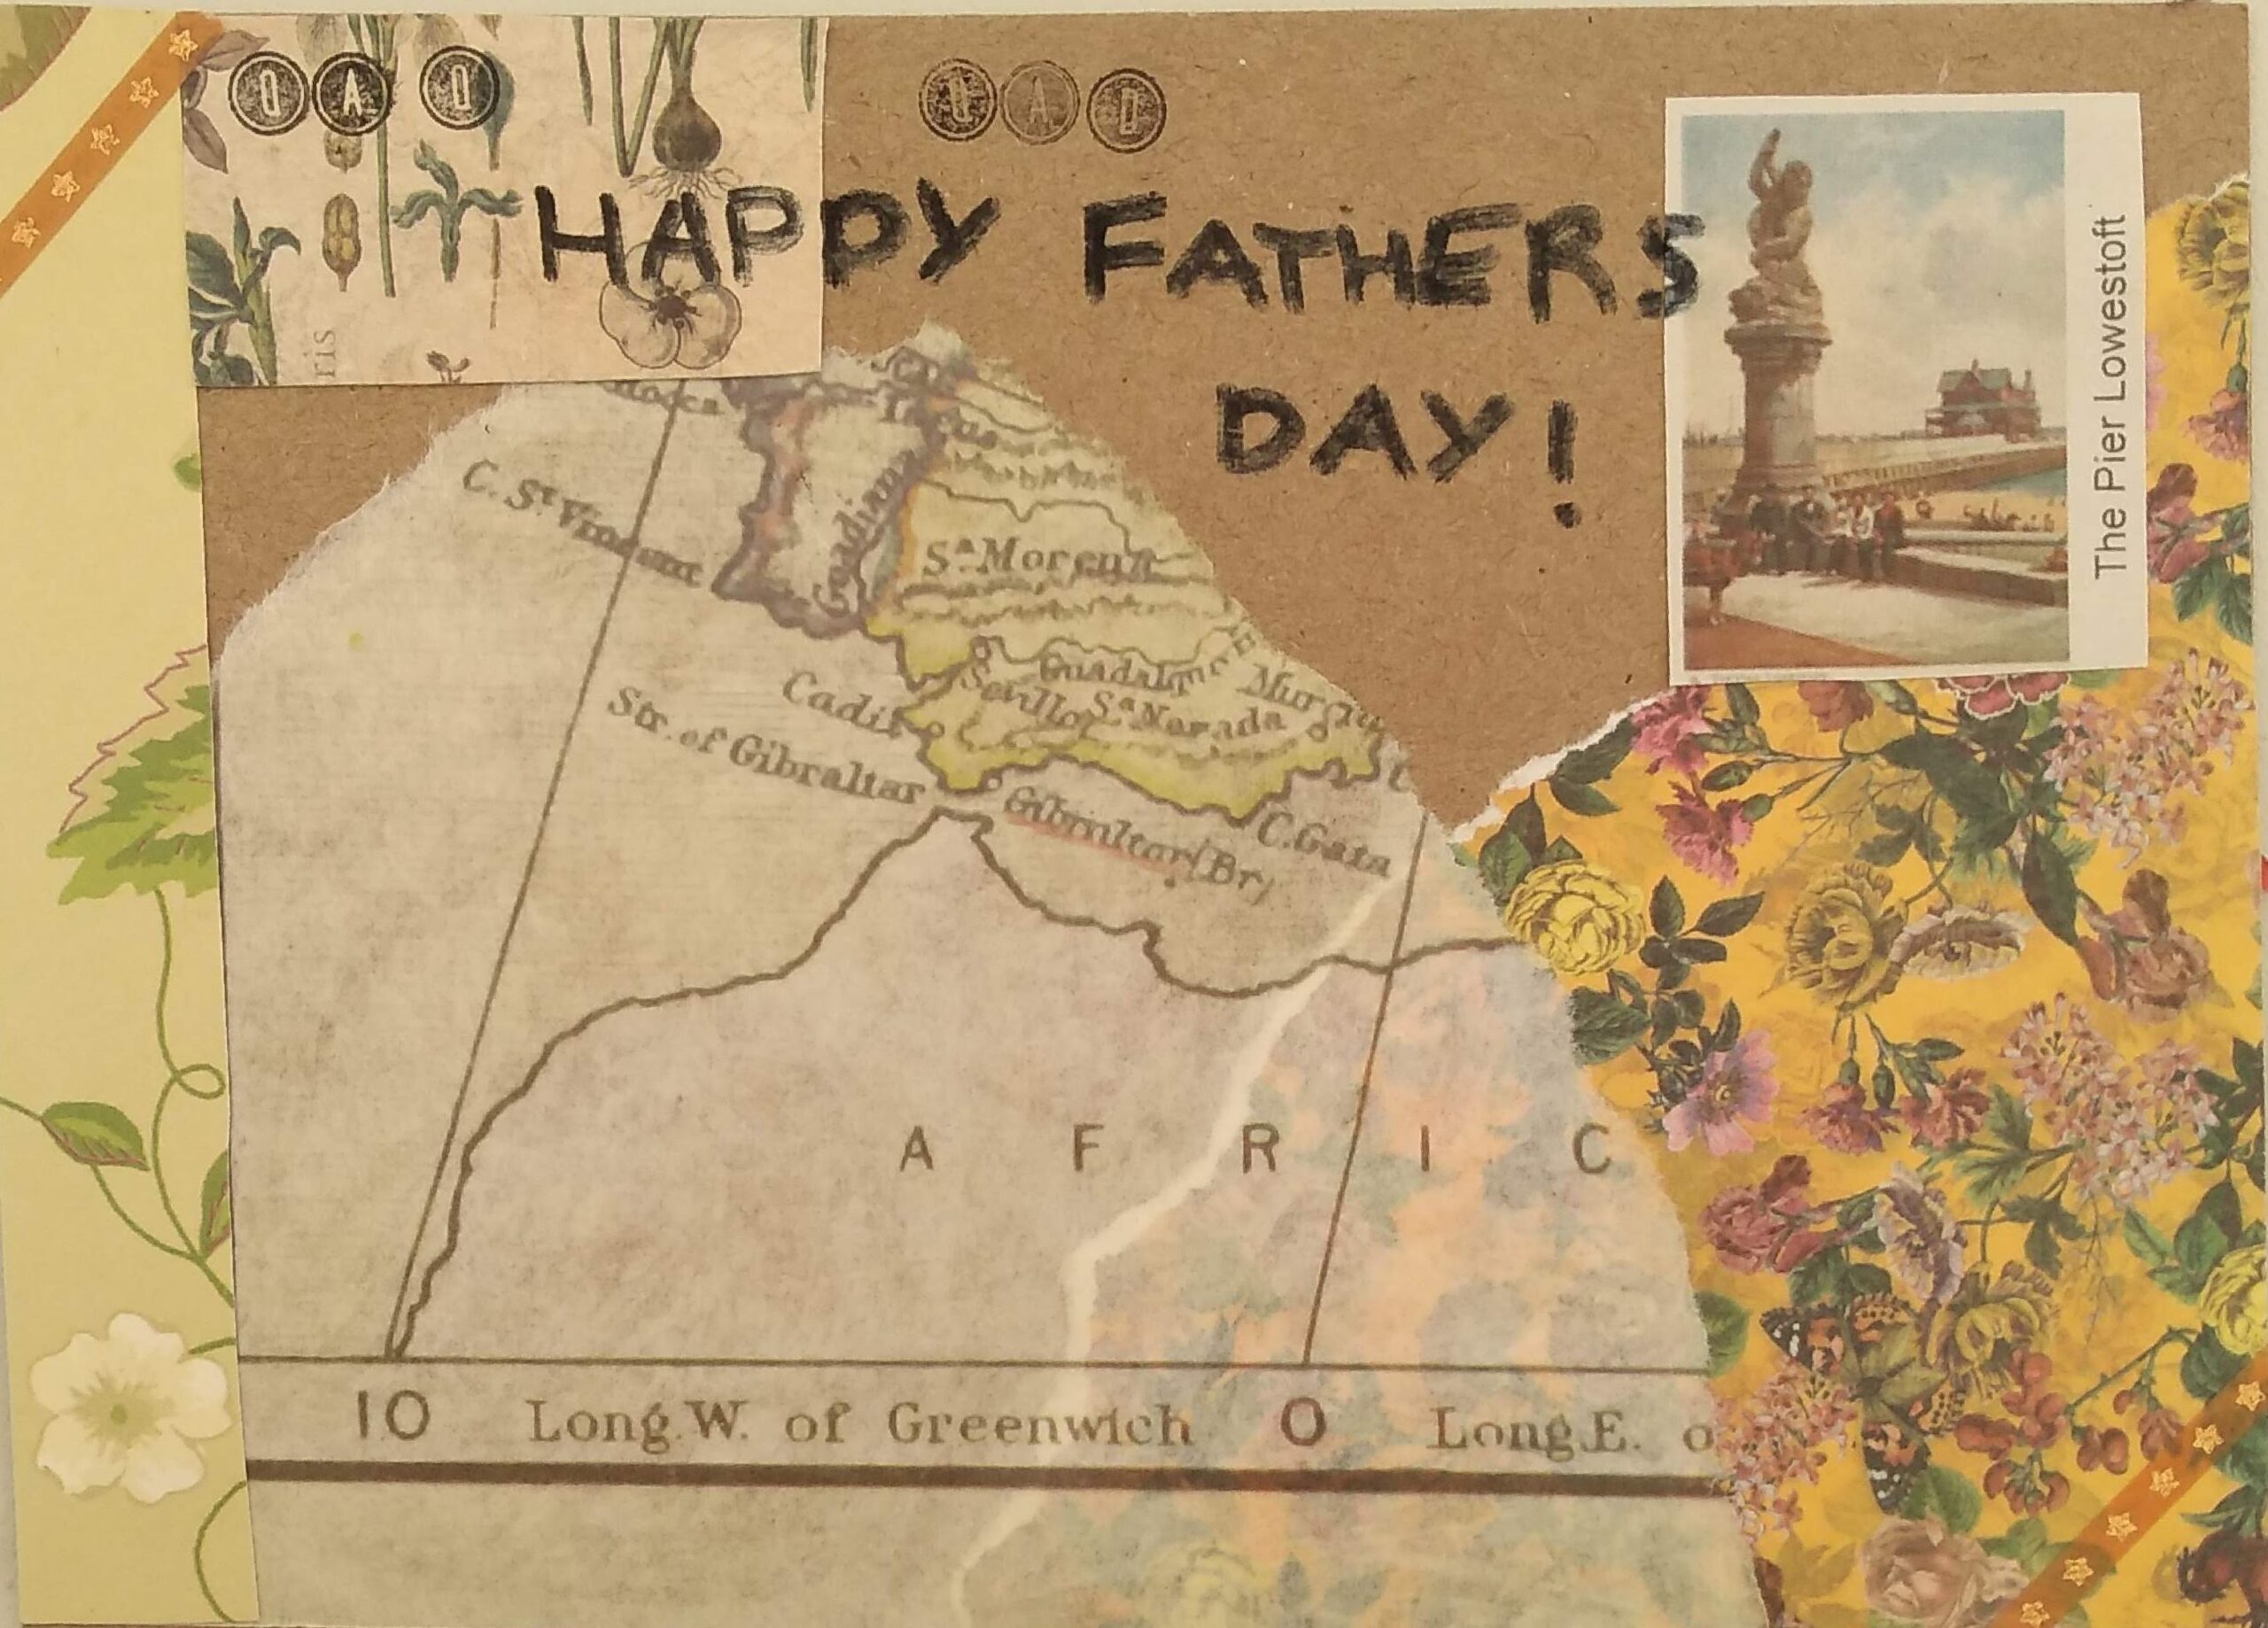 A blank brown postcard, collaged with images of a map of Africa, floral patterned papers and a small image of the Pier at Lowestoft. The inscription reads Happy Father Day